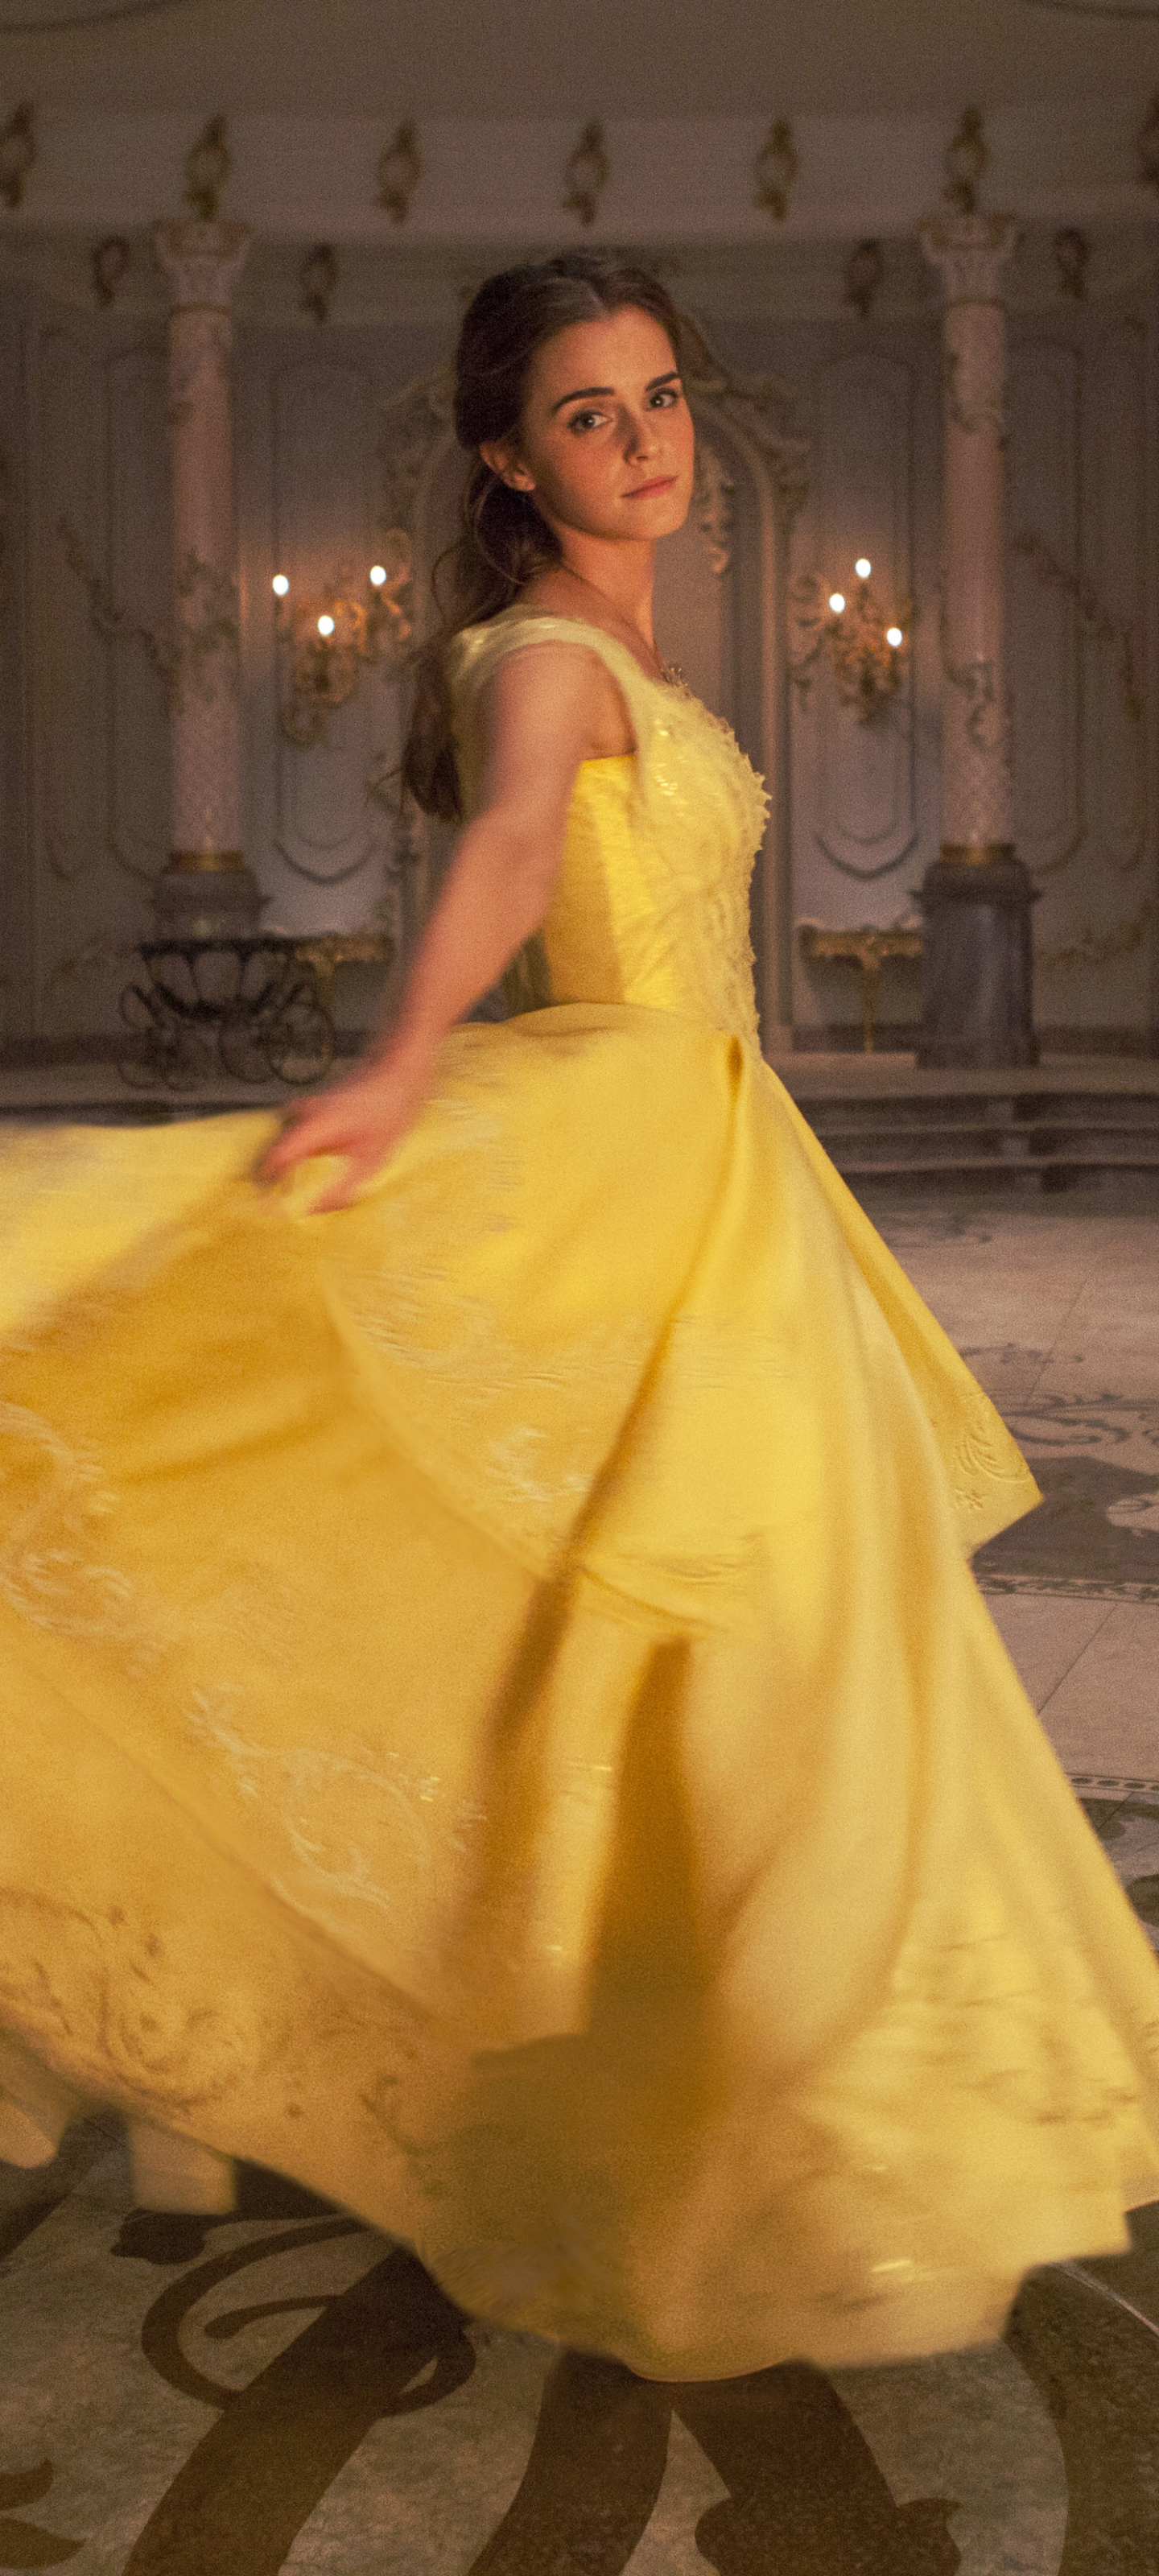 movie, beauty and the beast (2017), emma watson, yellow dress, belle (beauty and the beast) Aesthetic wallpaper